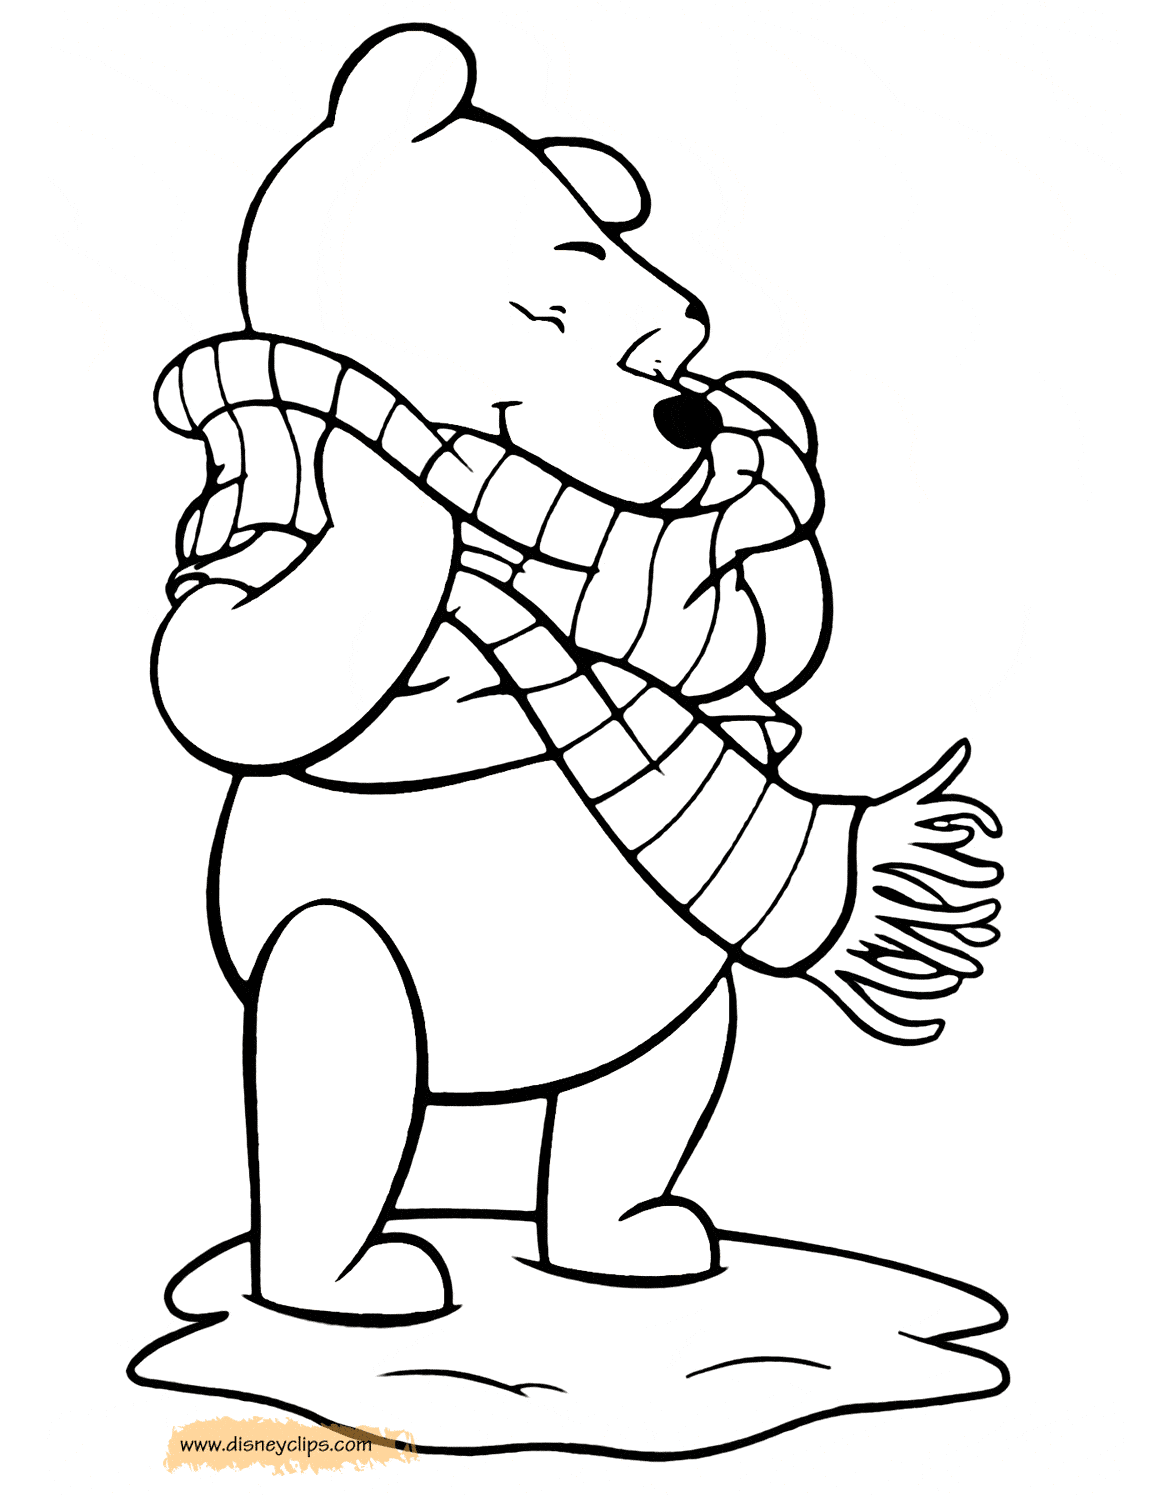 Pooh: Winnie the pooh coloring